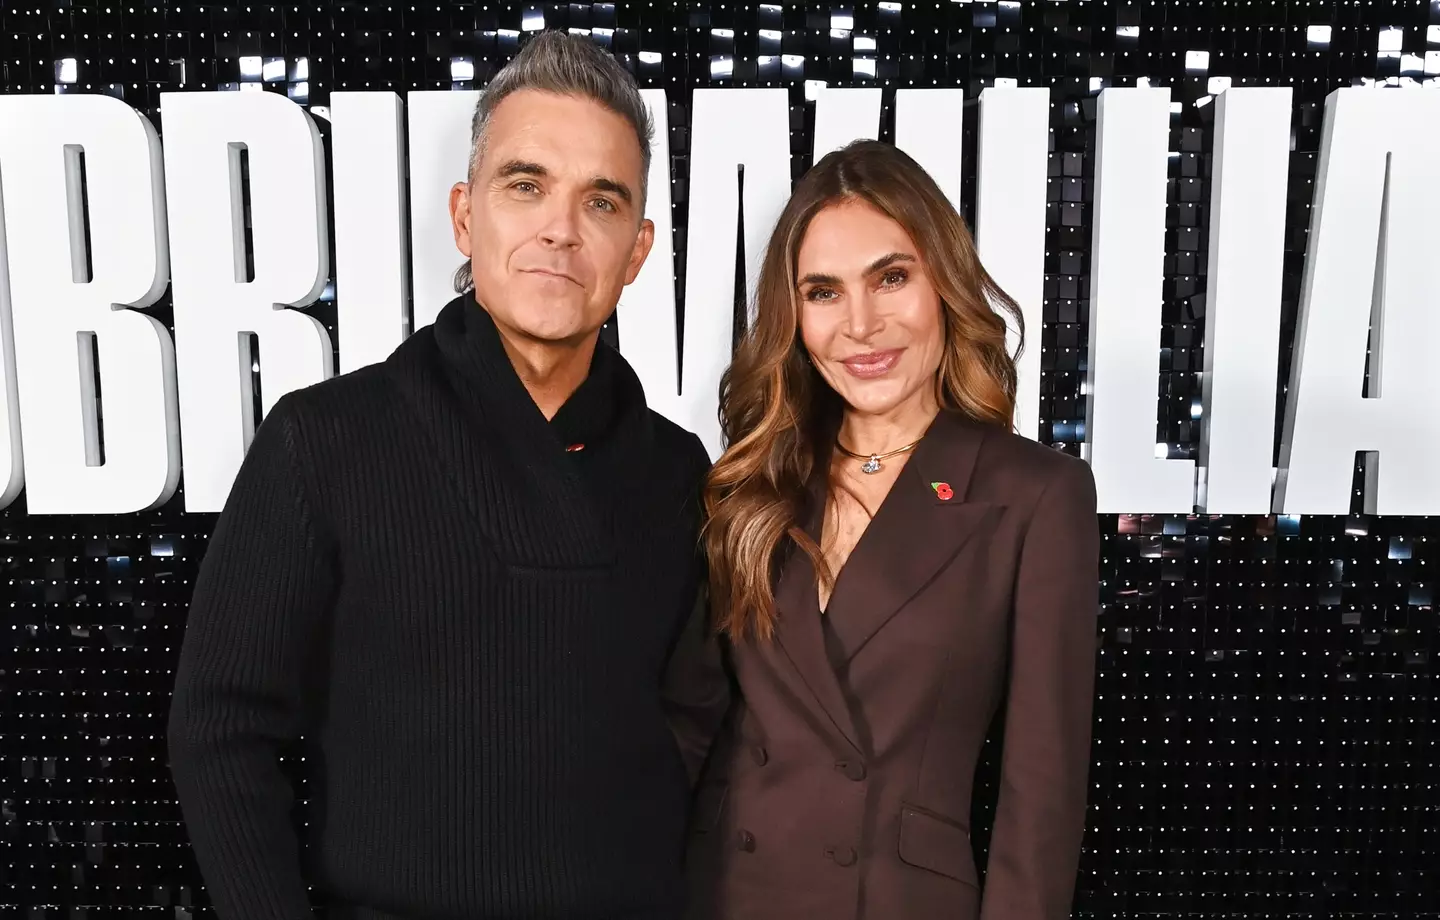 The pair opened up about their life in Robbie's Netflix documentary. (Dave Benett/WireImage/Getty Images)